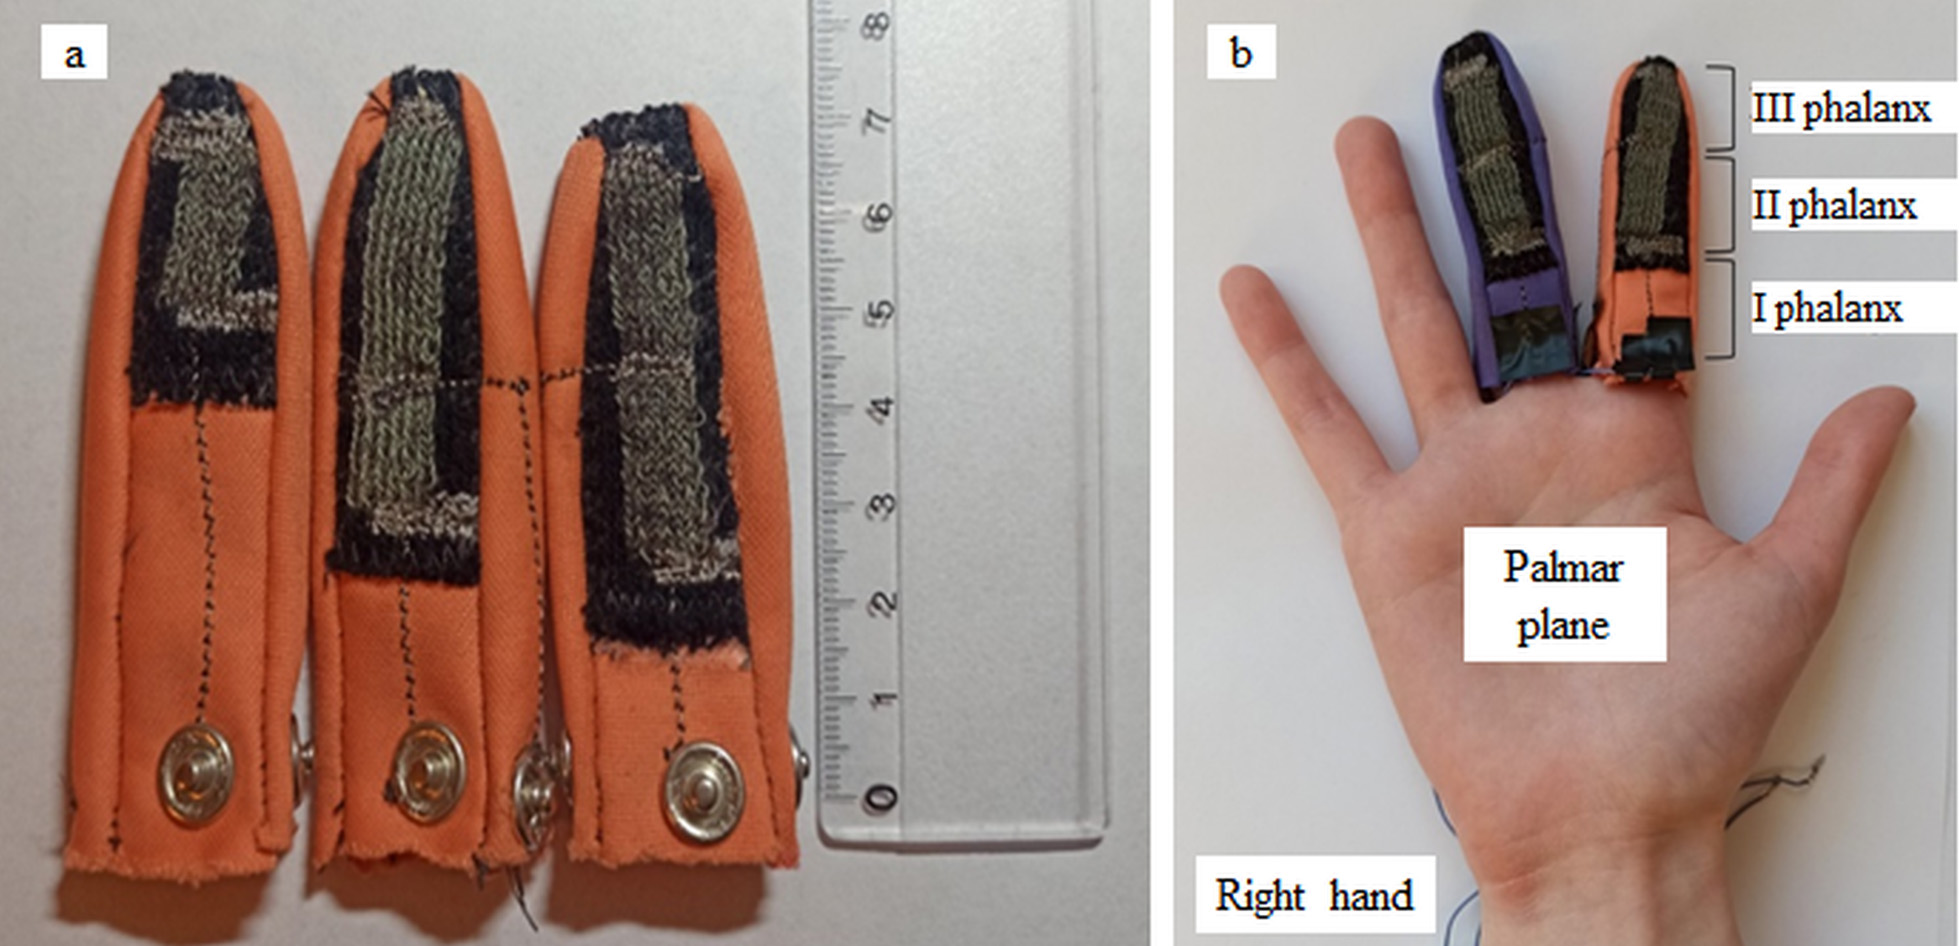 Fingerstalls with one (left) and two (middle and right) textile pressure sensors (a); fingerstalls positioning over shooter’s hand (b).